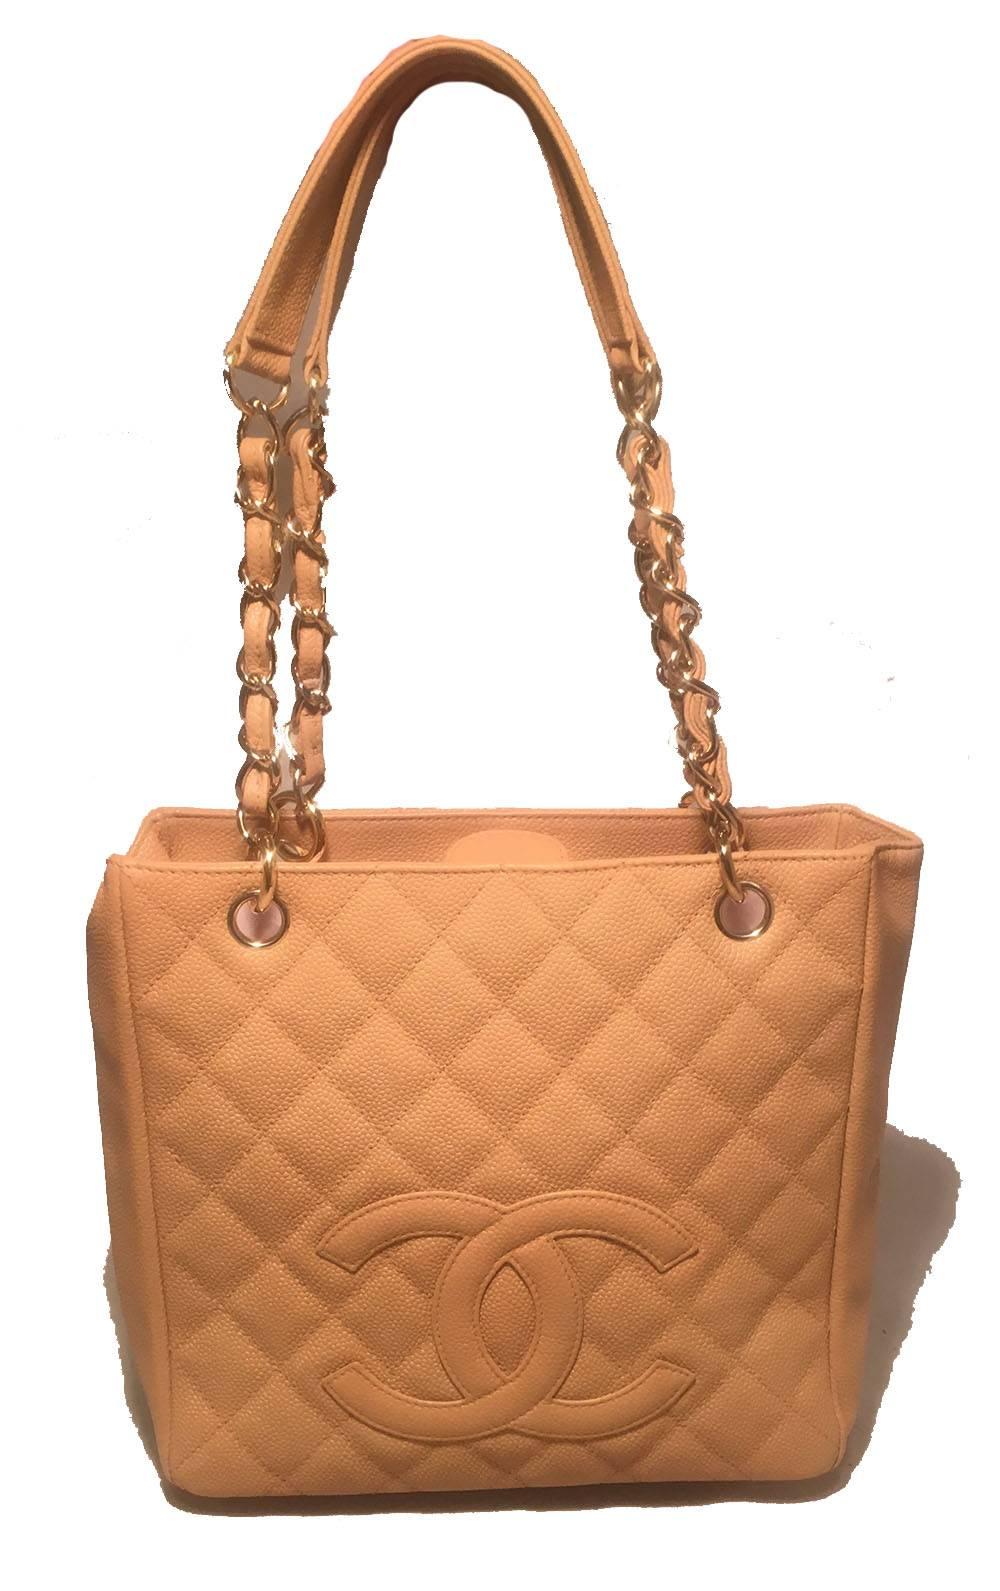 Beautiful Chanel Nude Quilted Caviar Leather Medium Shopping Tote in excellent condition.  Quilted nude caviar leather exterior with signature CC logo along front side.  shining gold hardware and woven chain and leather shoulder straps.  Top snap